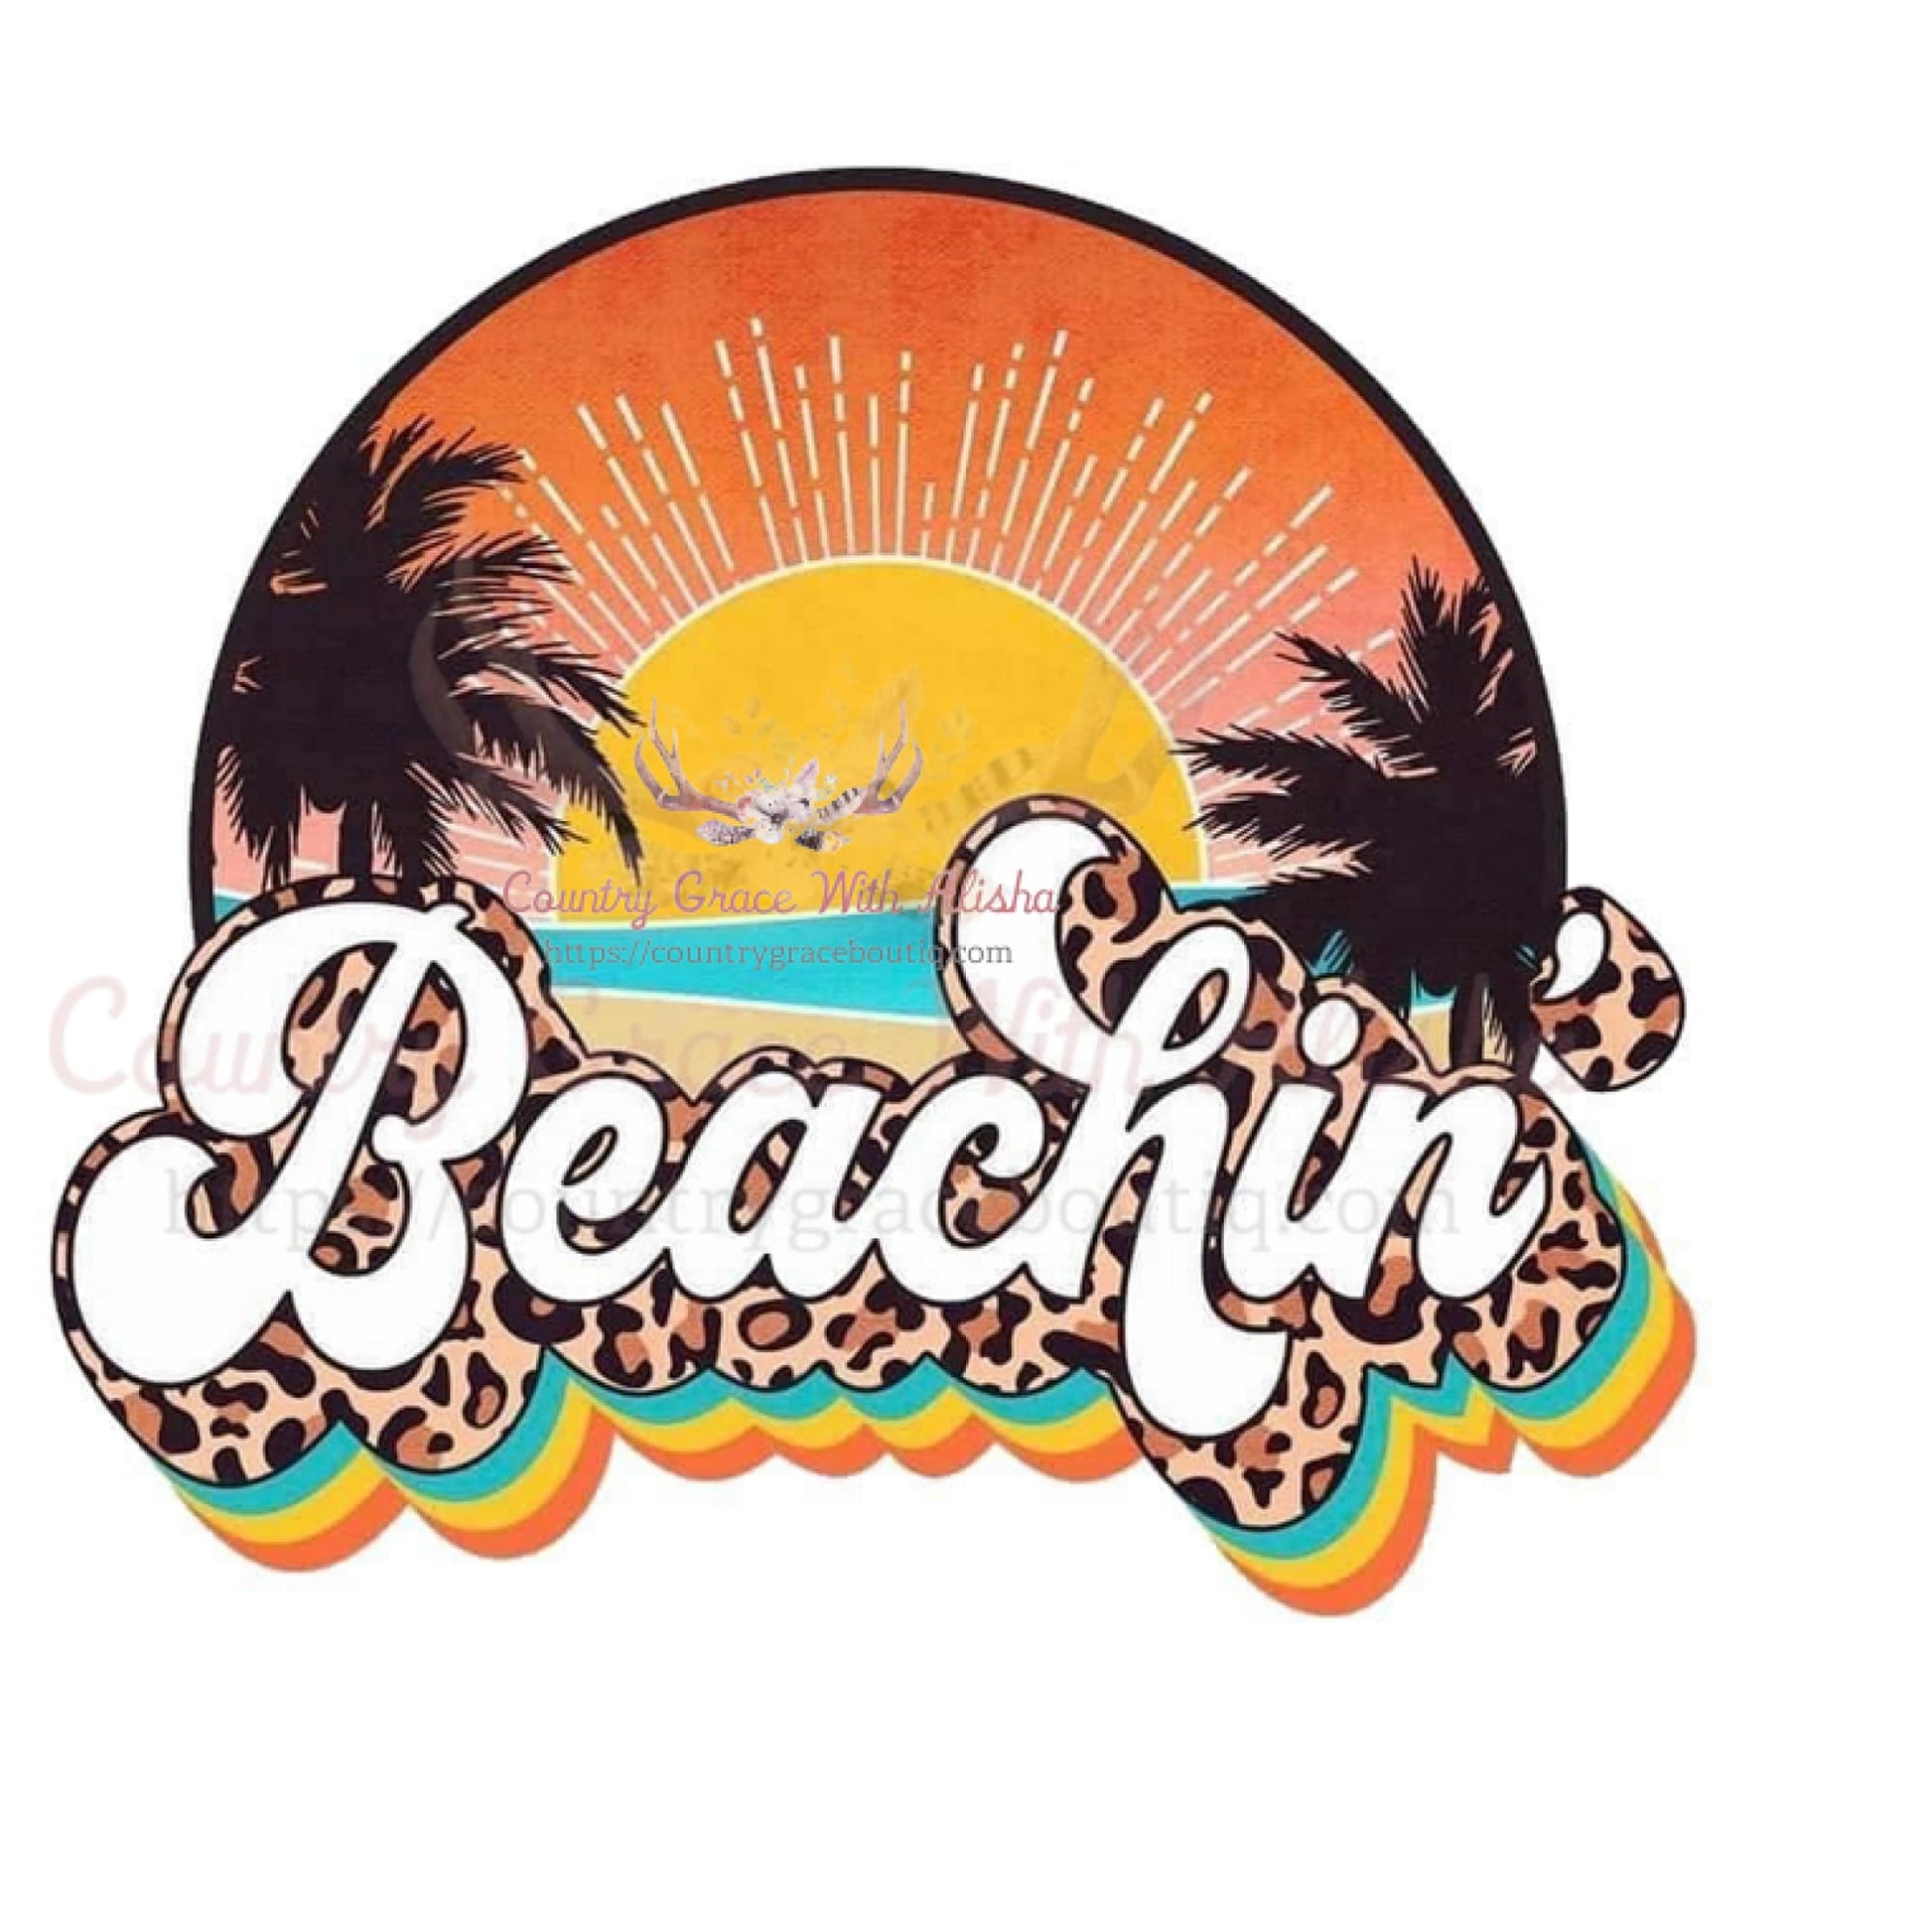 Beachin Sublimation Transfer - Sub $1.50 Country Grace With 